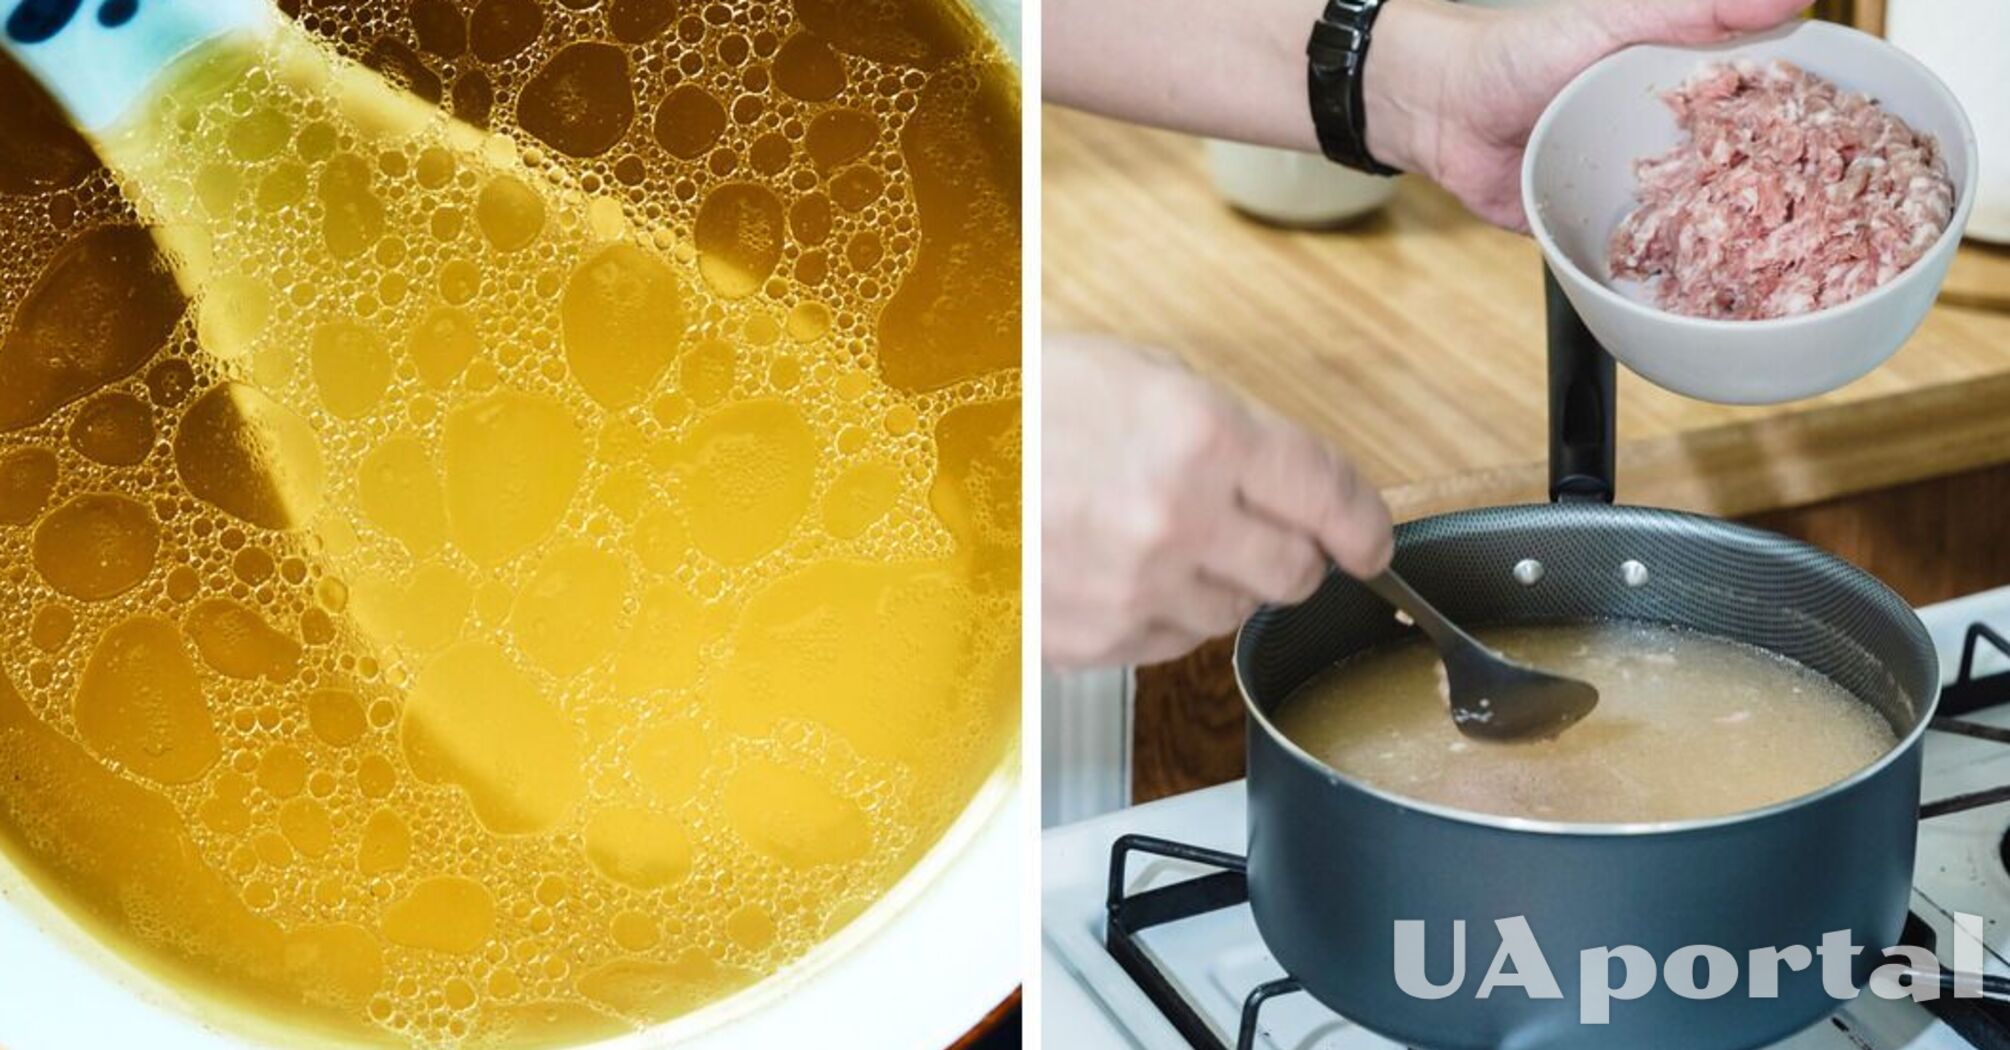 Three secret ingredients that will make the broth a golden color